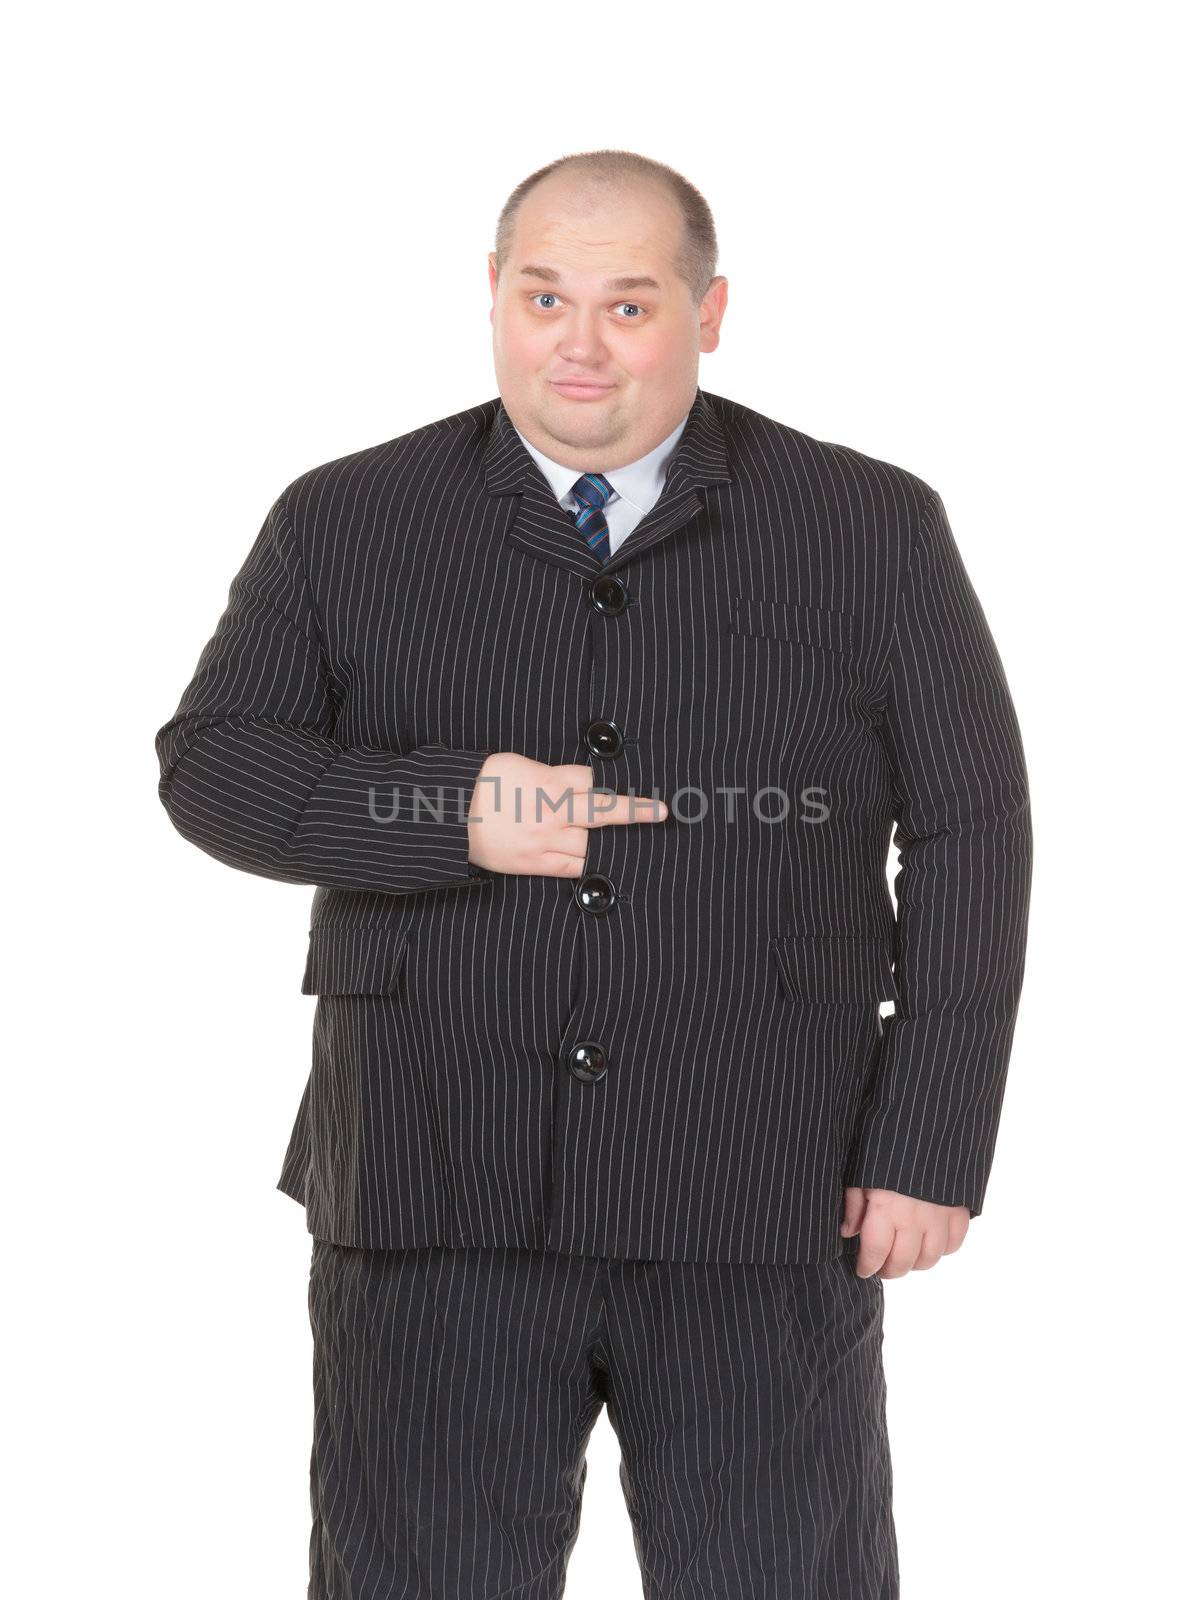 Obese businessman making gesturing by Discovod